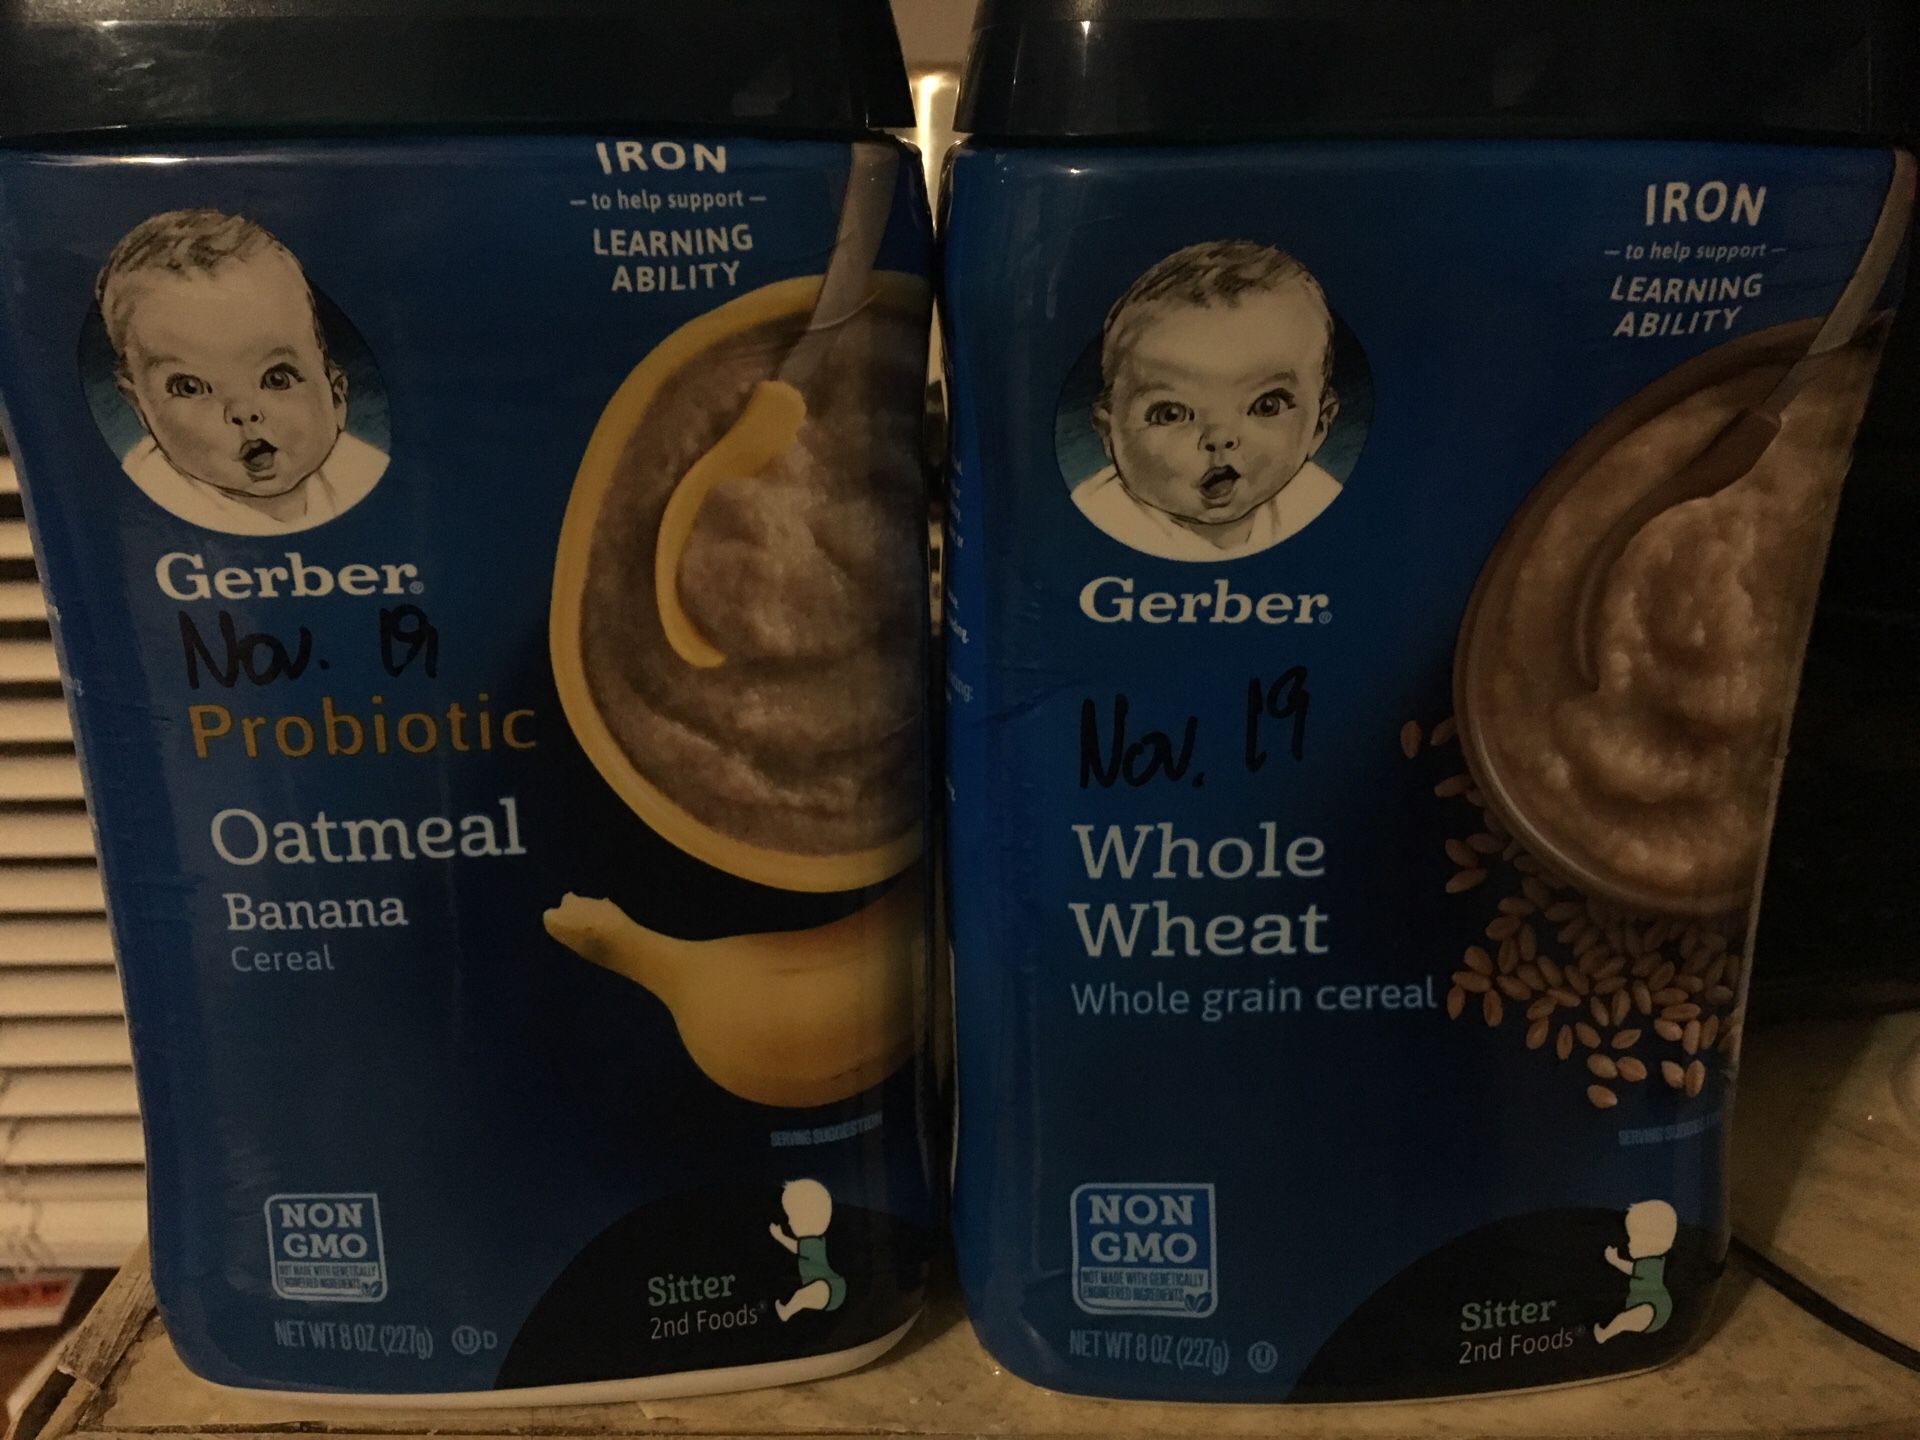 Baby cereal